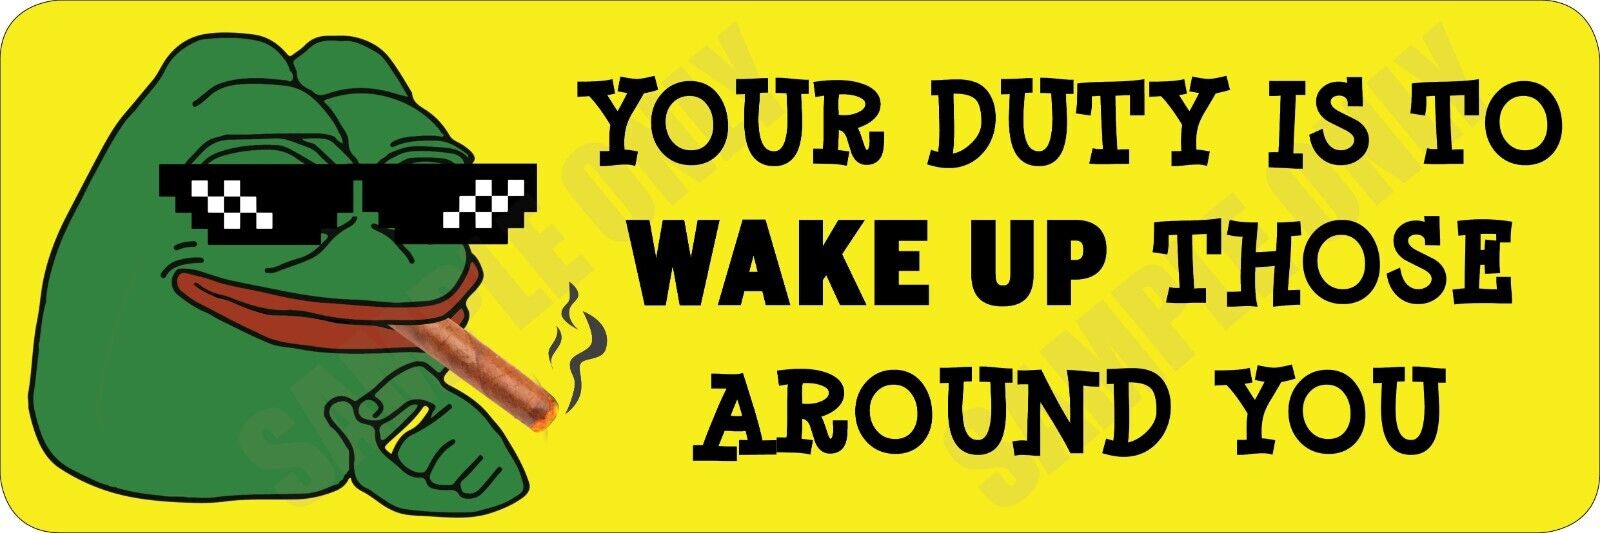 Massive 50 x 15cm Your Duty is to WAKE UP those  - TRUMP 2024 - Bumper Sticker